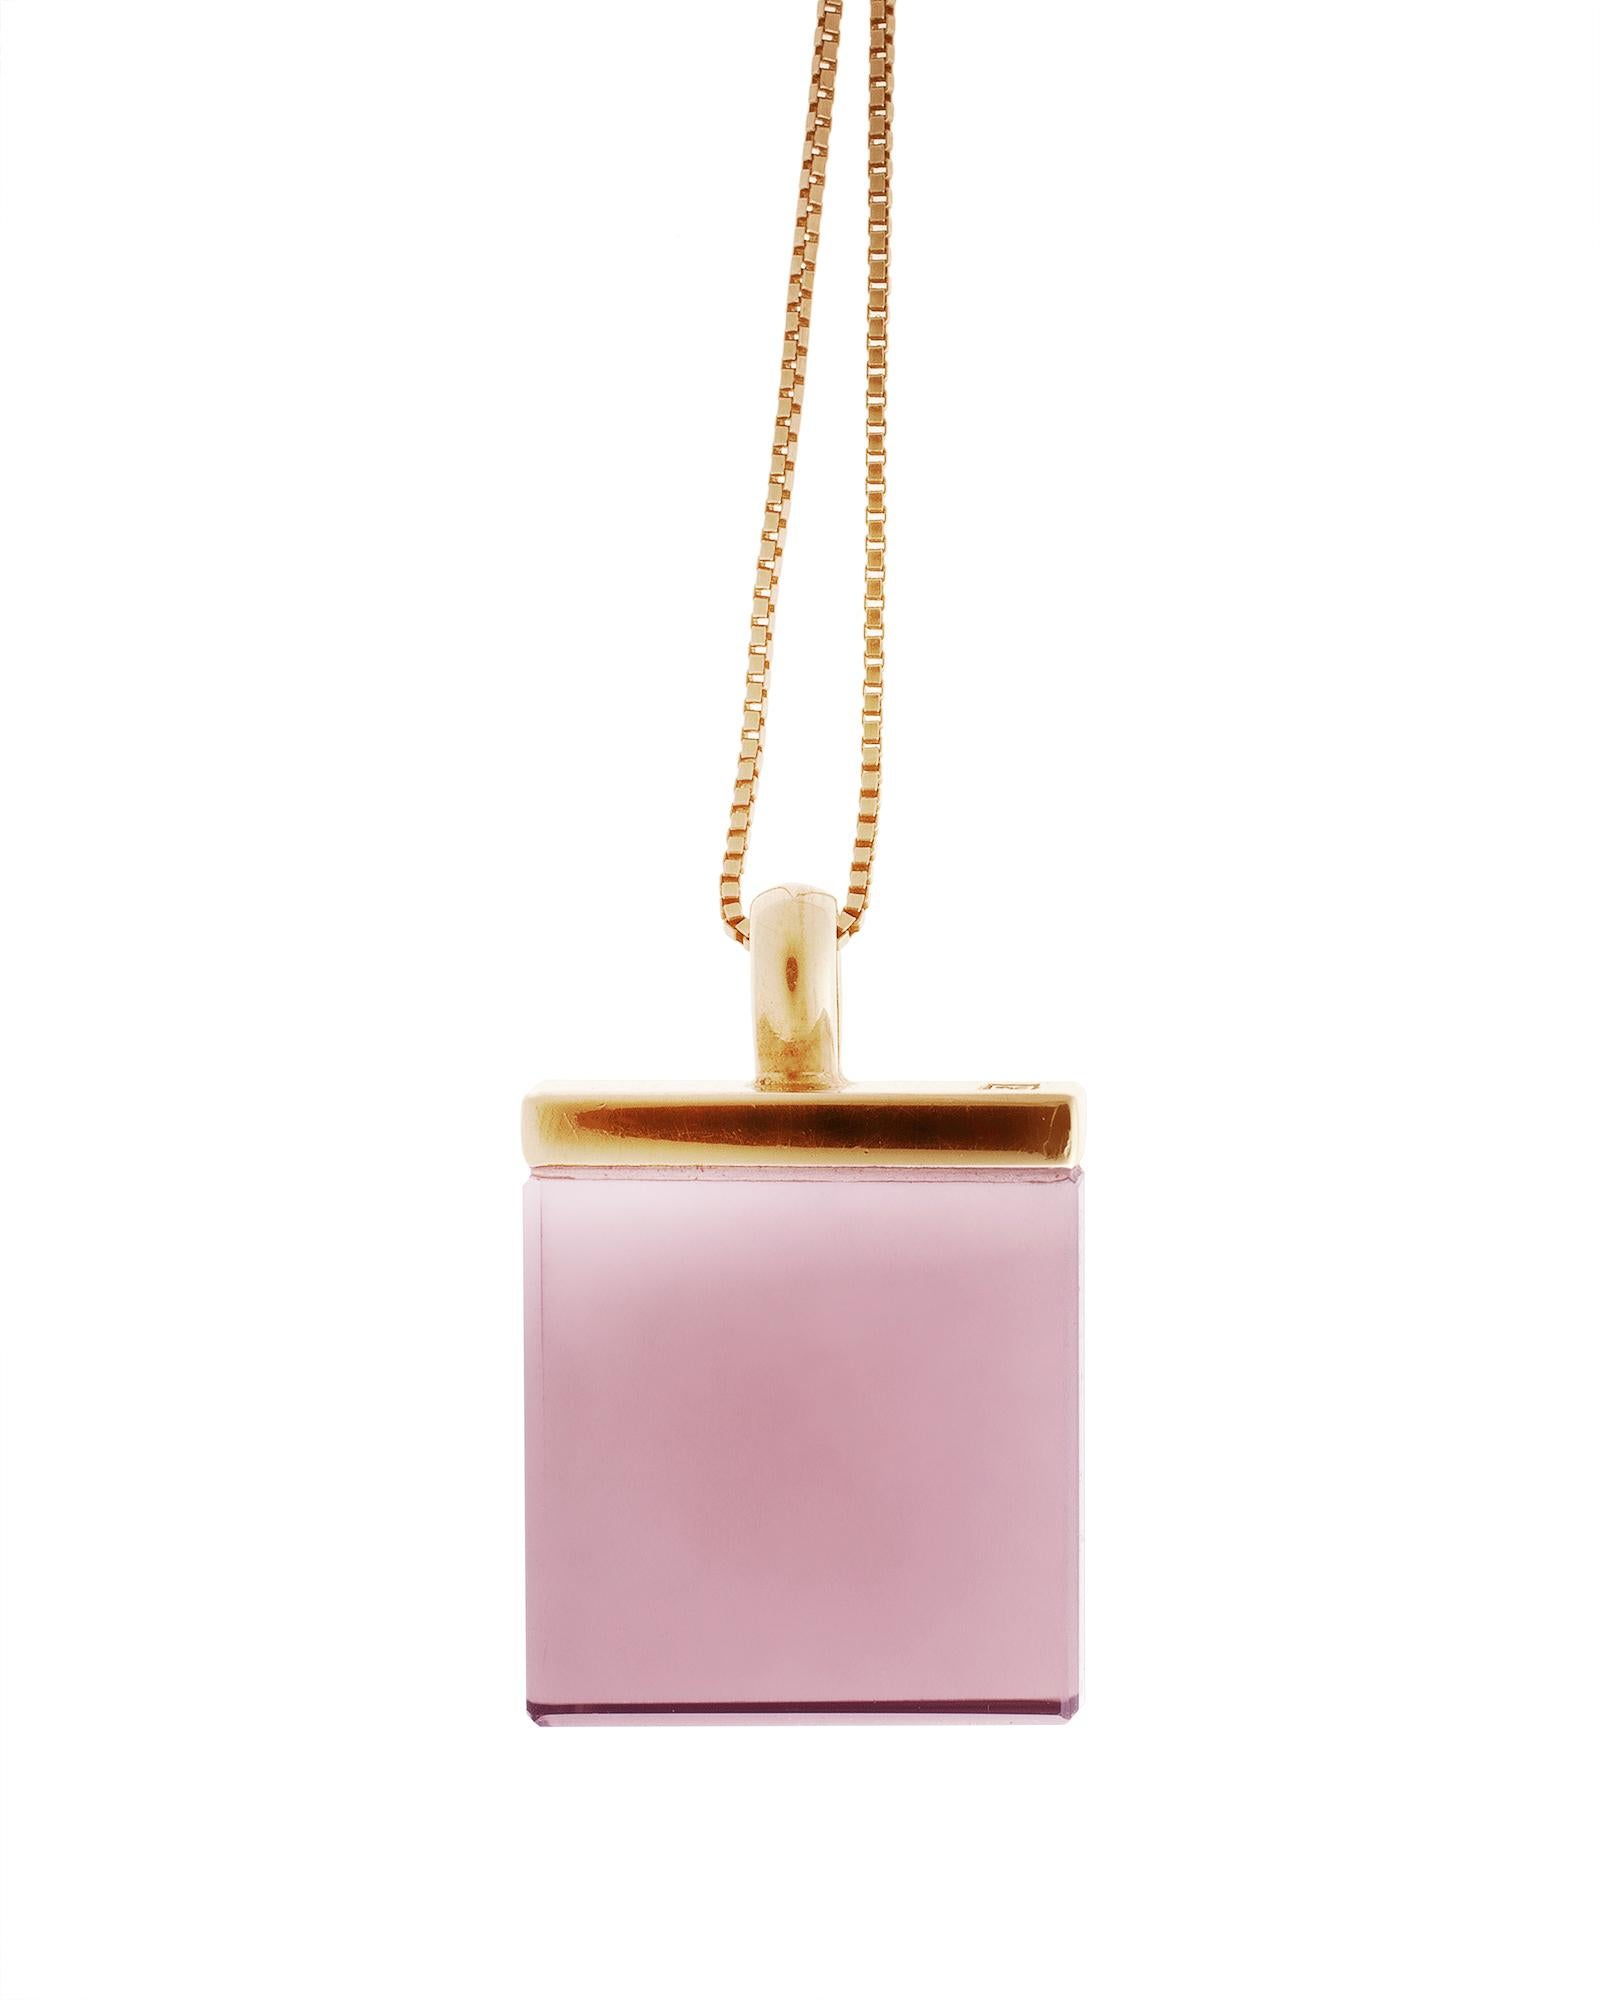 This contemporary pendant necklace is a stunning piece of jewellery crafted in 18 karat rose gold with a 15x15x8 mm natural untreated pink tourmaline. The gemstone was cut specially for the artist by the oldest company in Germany, which has been in